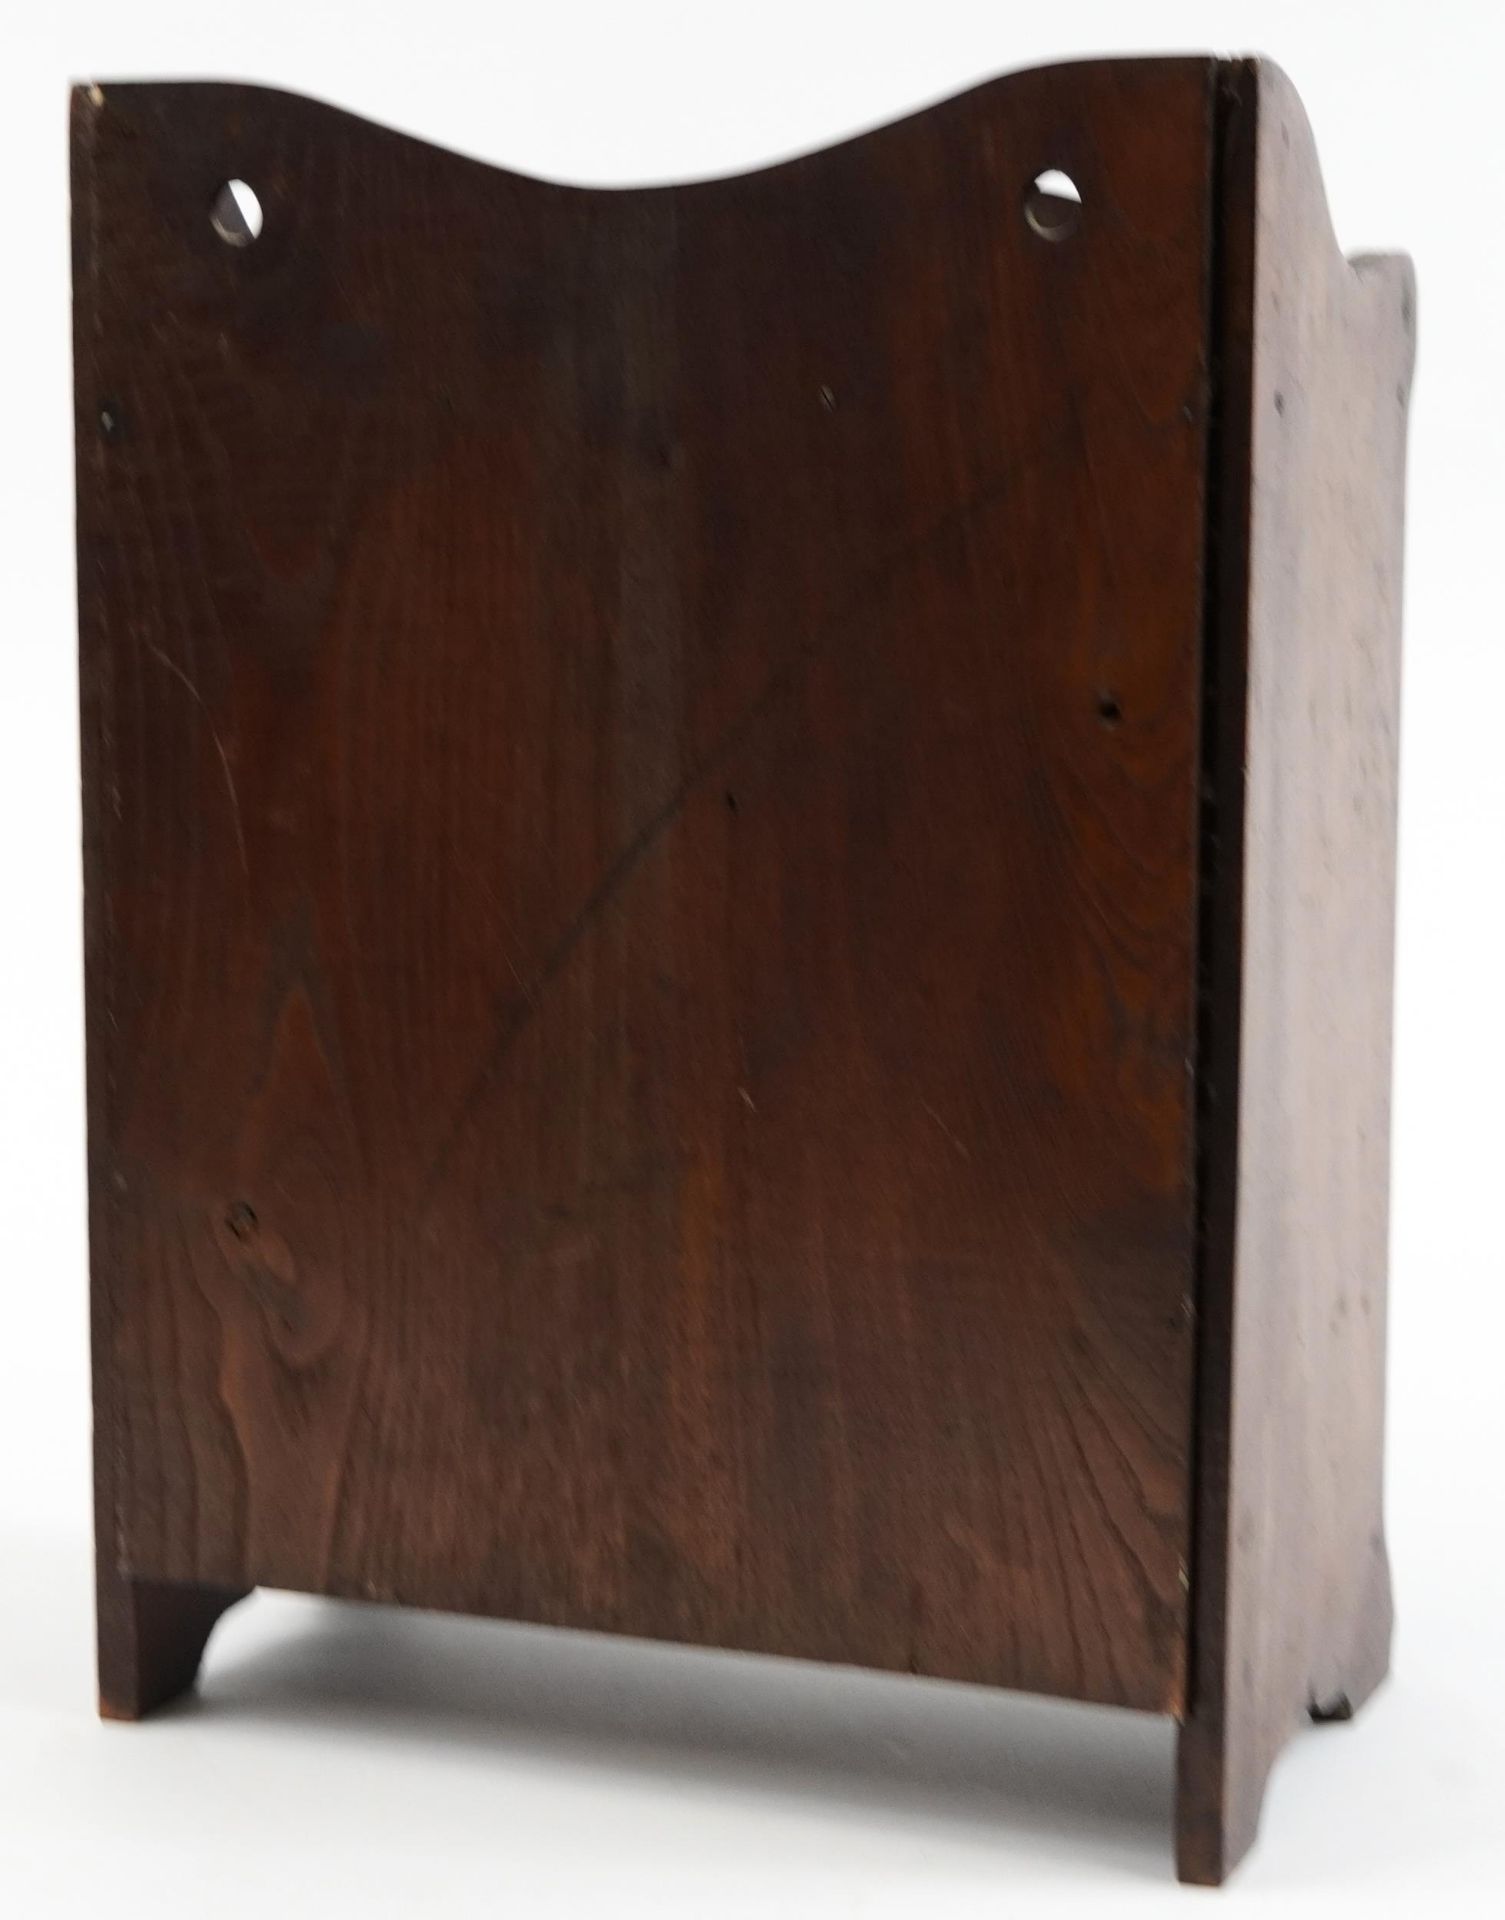 Arts & Crafts oak two door smokers cabinet with fitted interior, 45cm H x 32.5cm W x 18cm D - Bild 3 aus 4